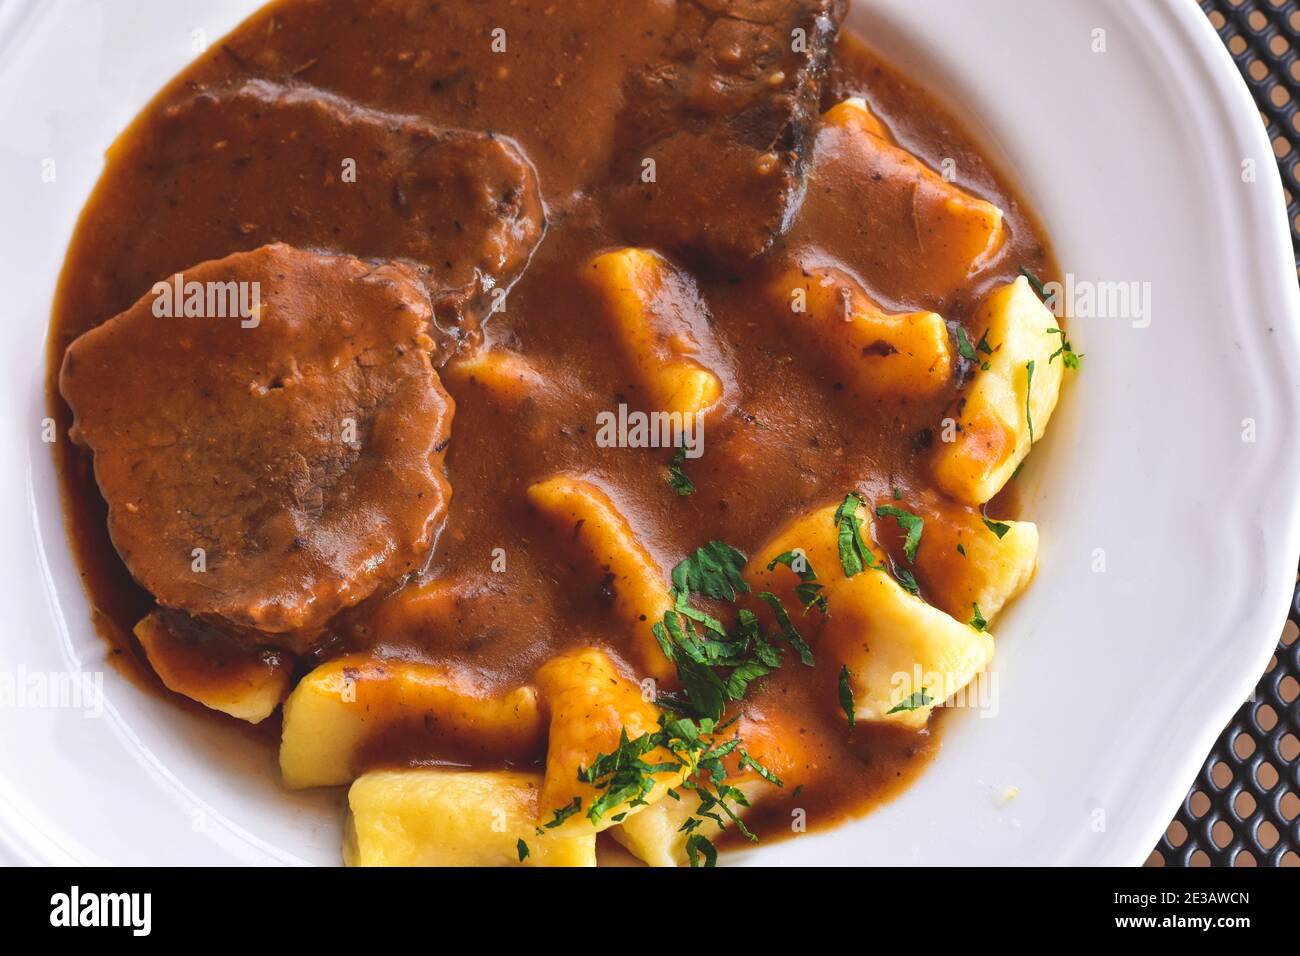 Pasticada With Gnocchi - Dalmatian Pot Roast or beef/ Croatian dish - Pasticada with gnocchi, beef stew in a sauce  at dark wooden background Stock Photo